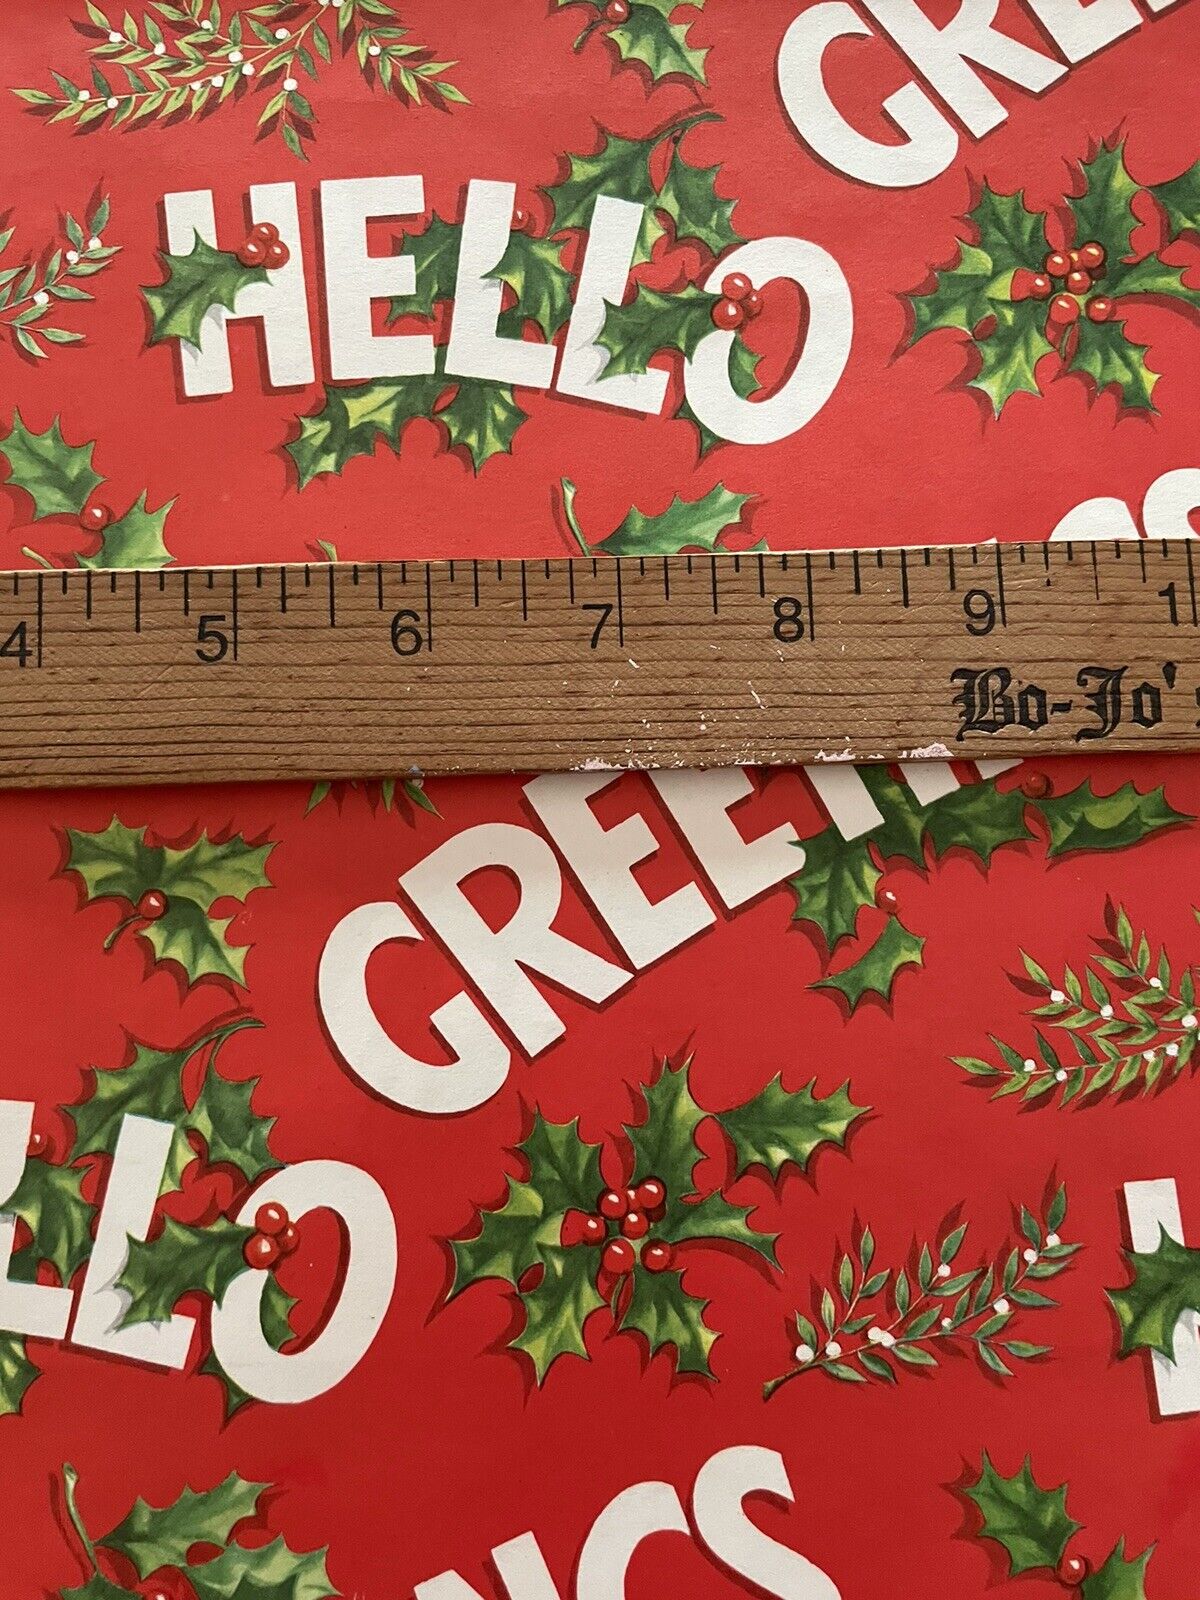 VTG CHRISTMAS WRAPPING PAPER GIFT WRAP NOS HELLO GREETINGS HOLLY ON RED 1950